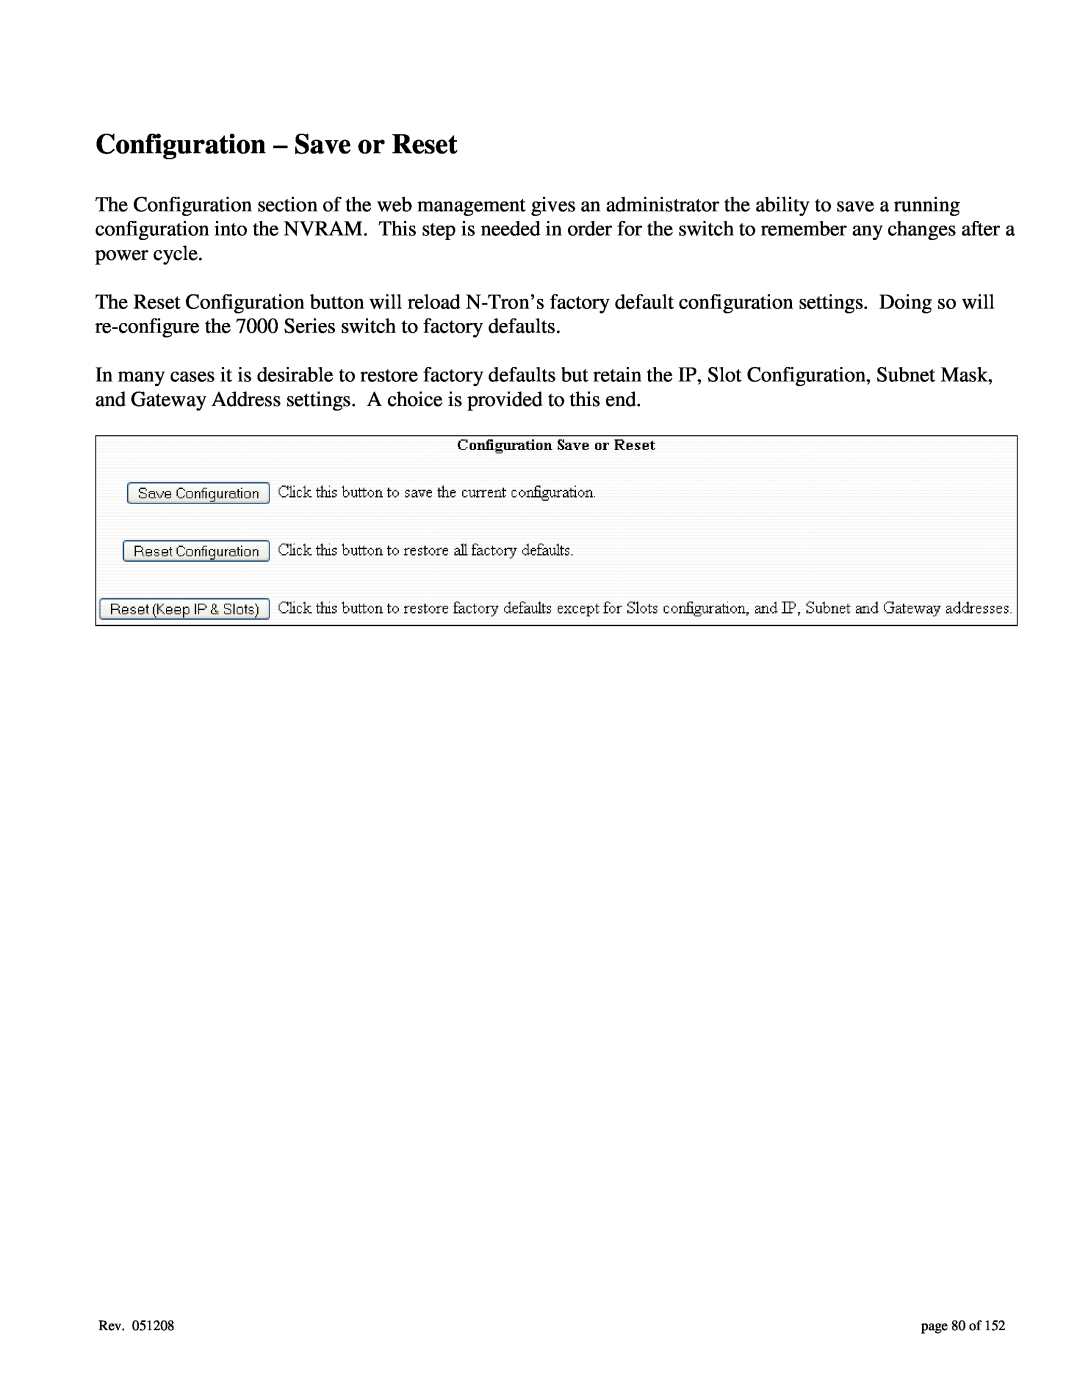 Gigabyte 7014 user manual Configuration - Save or Reset, page 80 of 